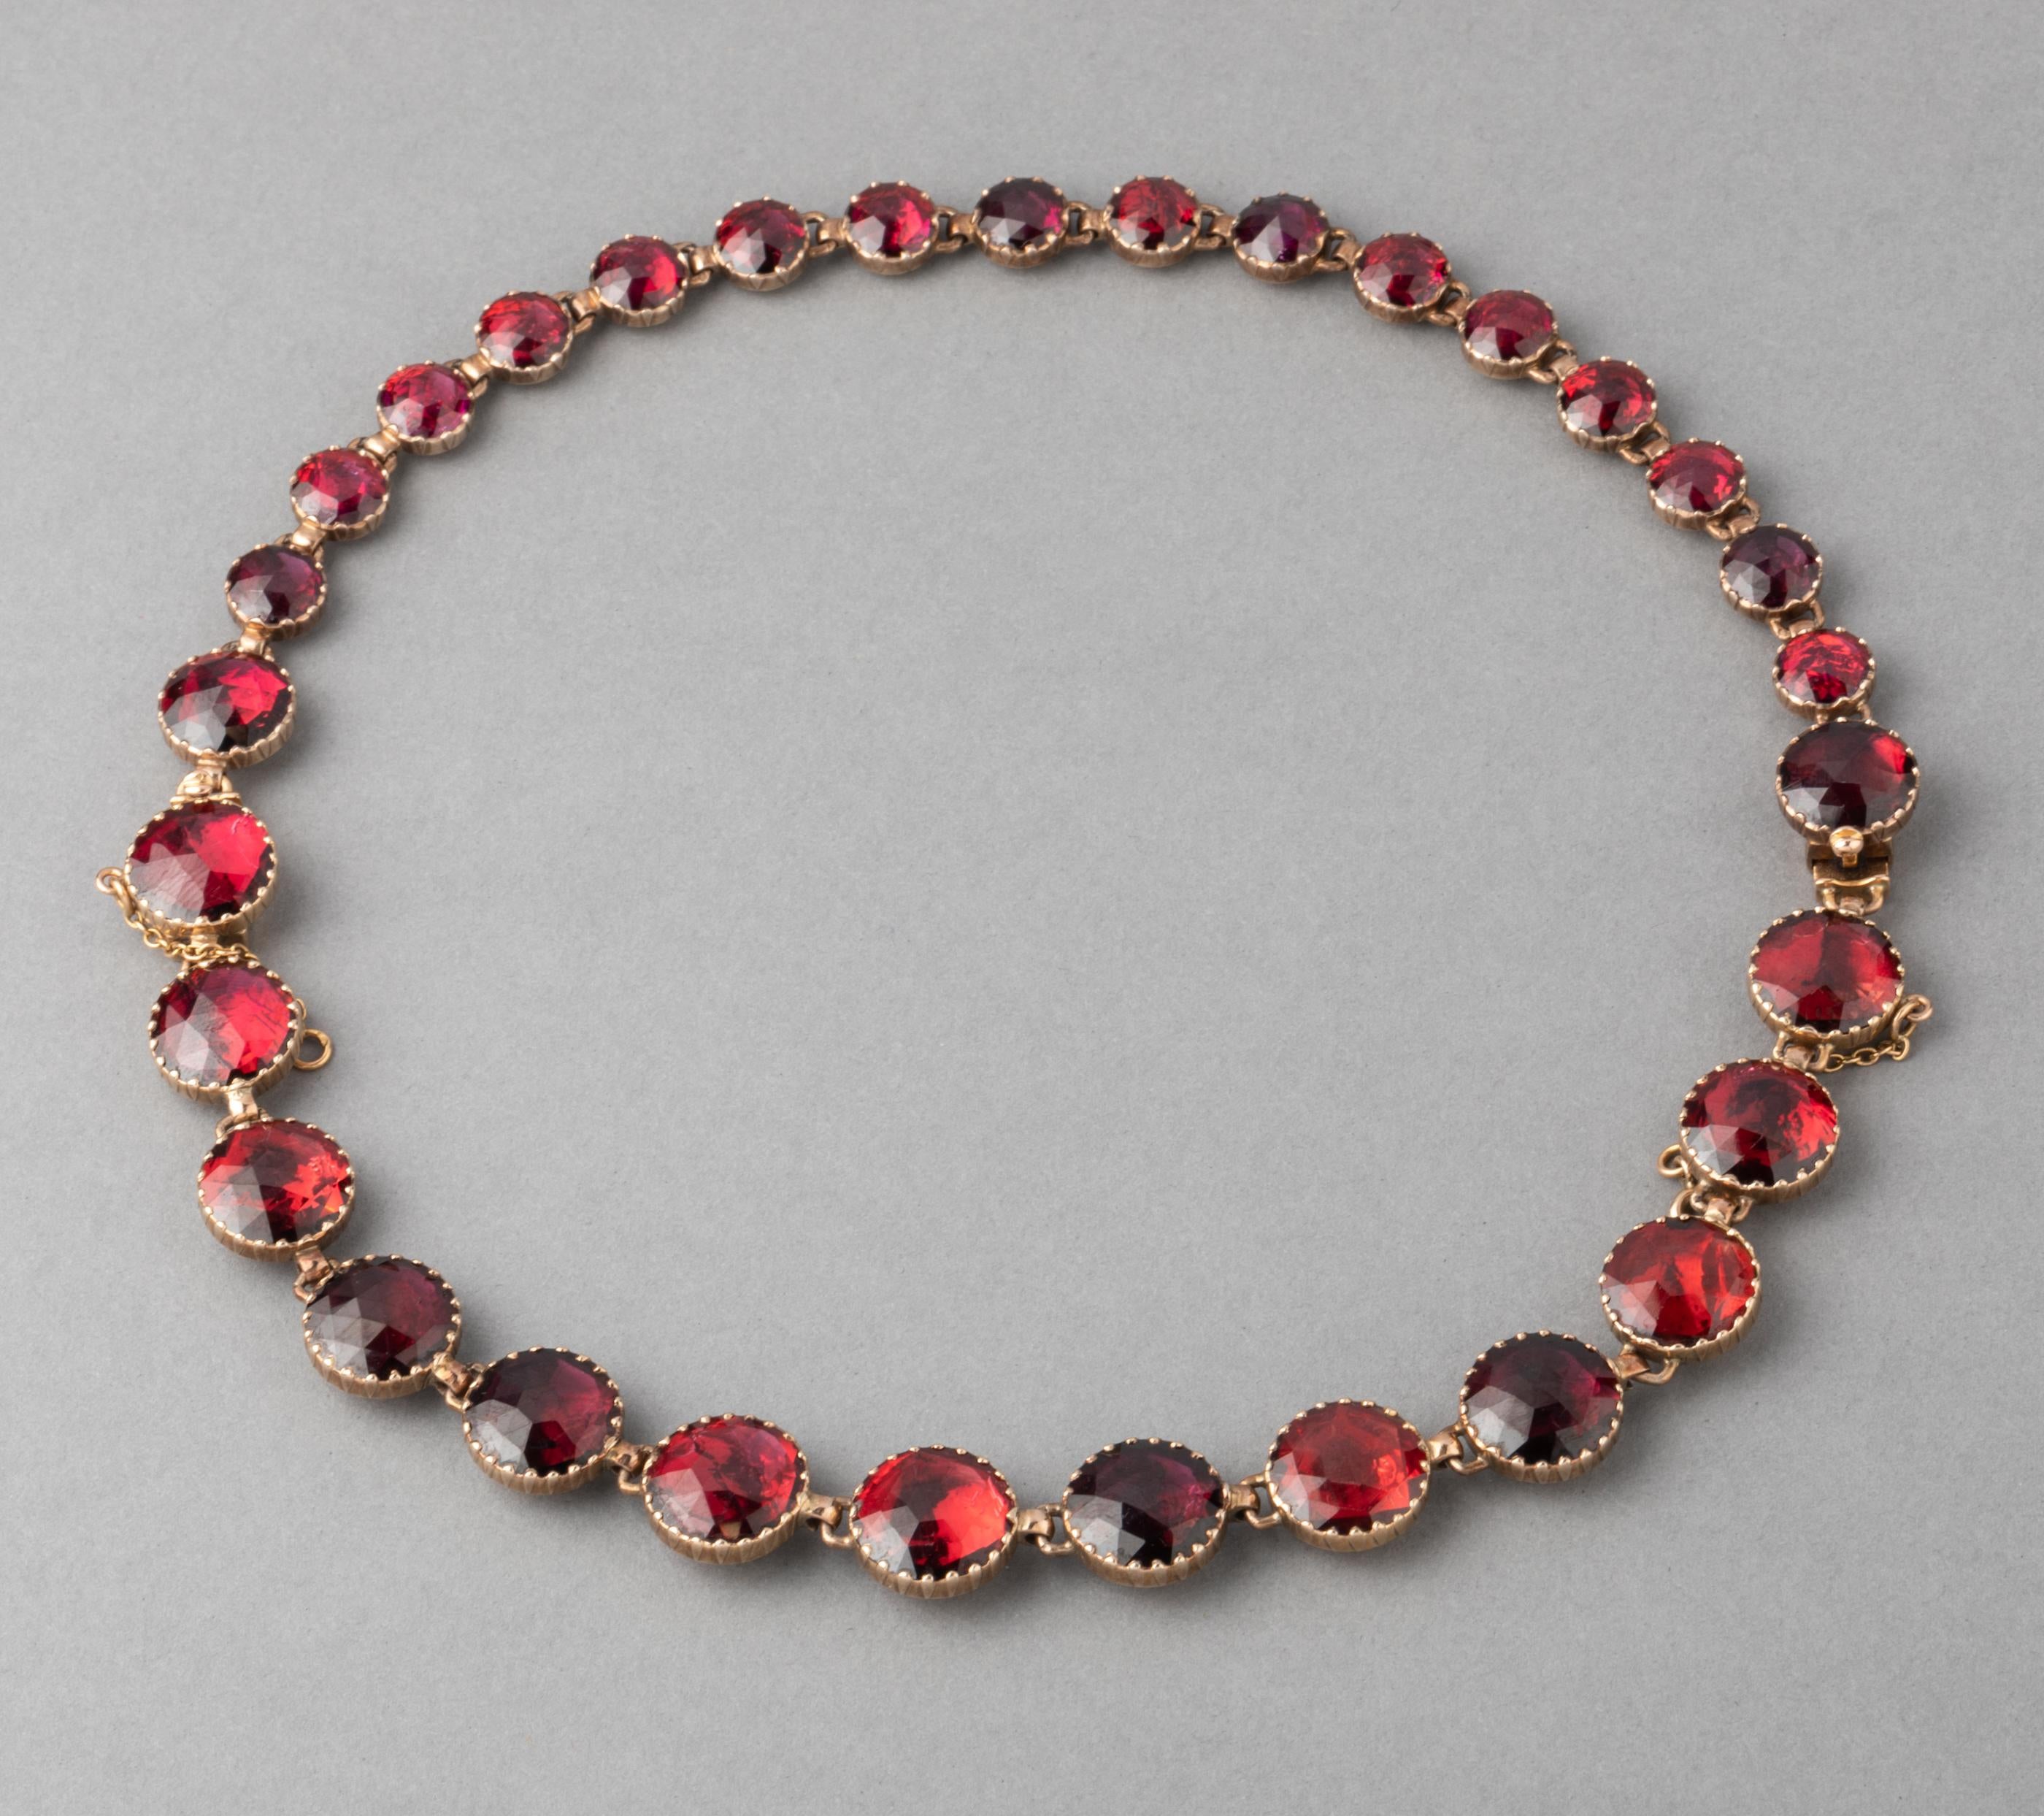 Antique Gold and Garnets French Necklace

Very beautiful antique necklace, made in France circa 1880. 
Made in rose gold 18k, horse head mark. Set with beautiful red garnets, they are good quality, the color is intense and very clear